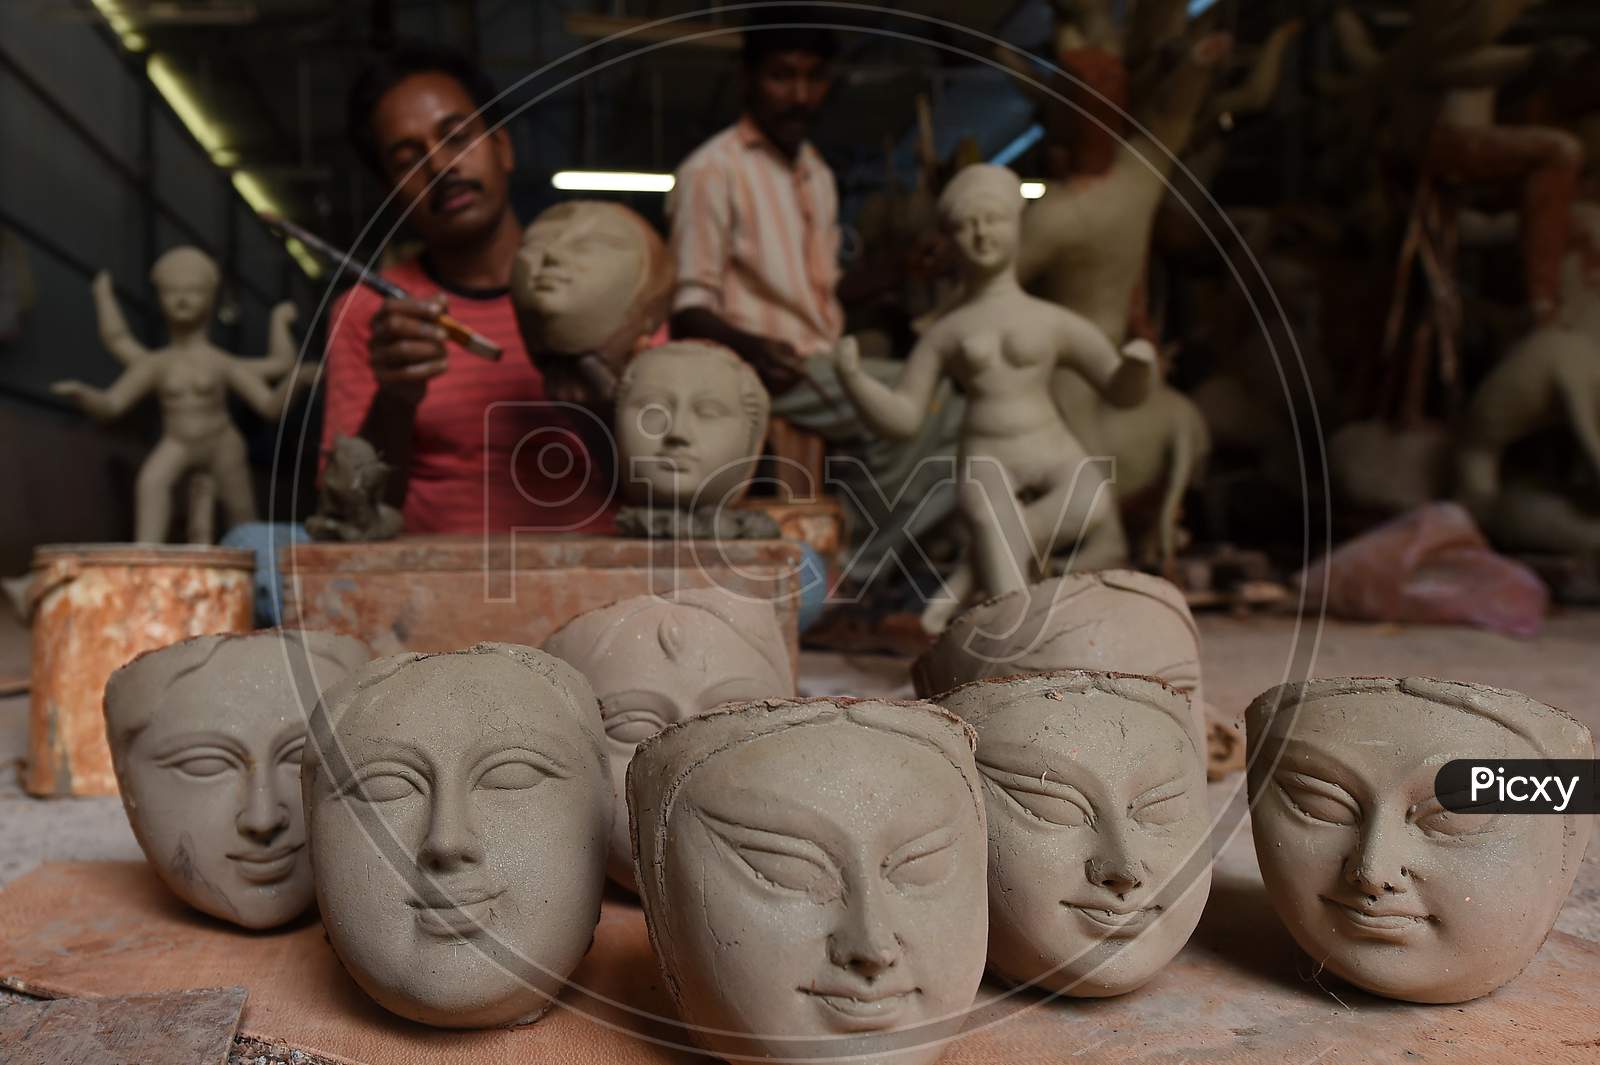 An Artisan Works On Clay Sculptures Depicting A Goddess Durga Ahead Of The Upcoming 'Durga Puja' Festival In Chennai On October 15, 2020.